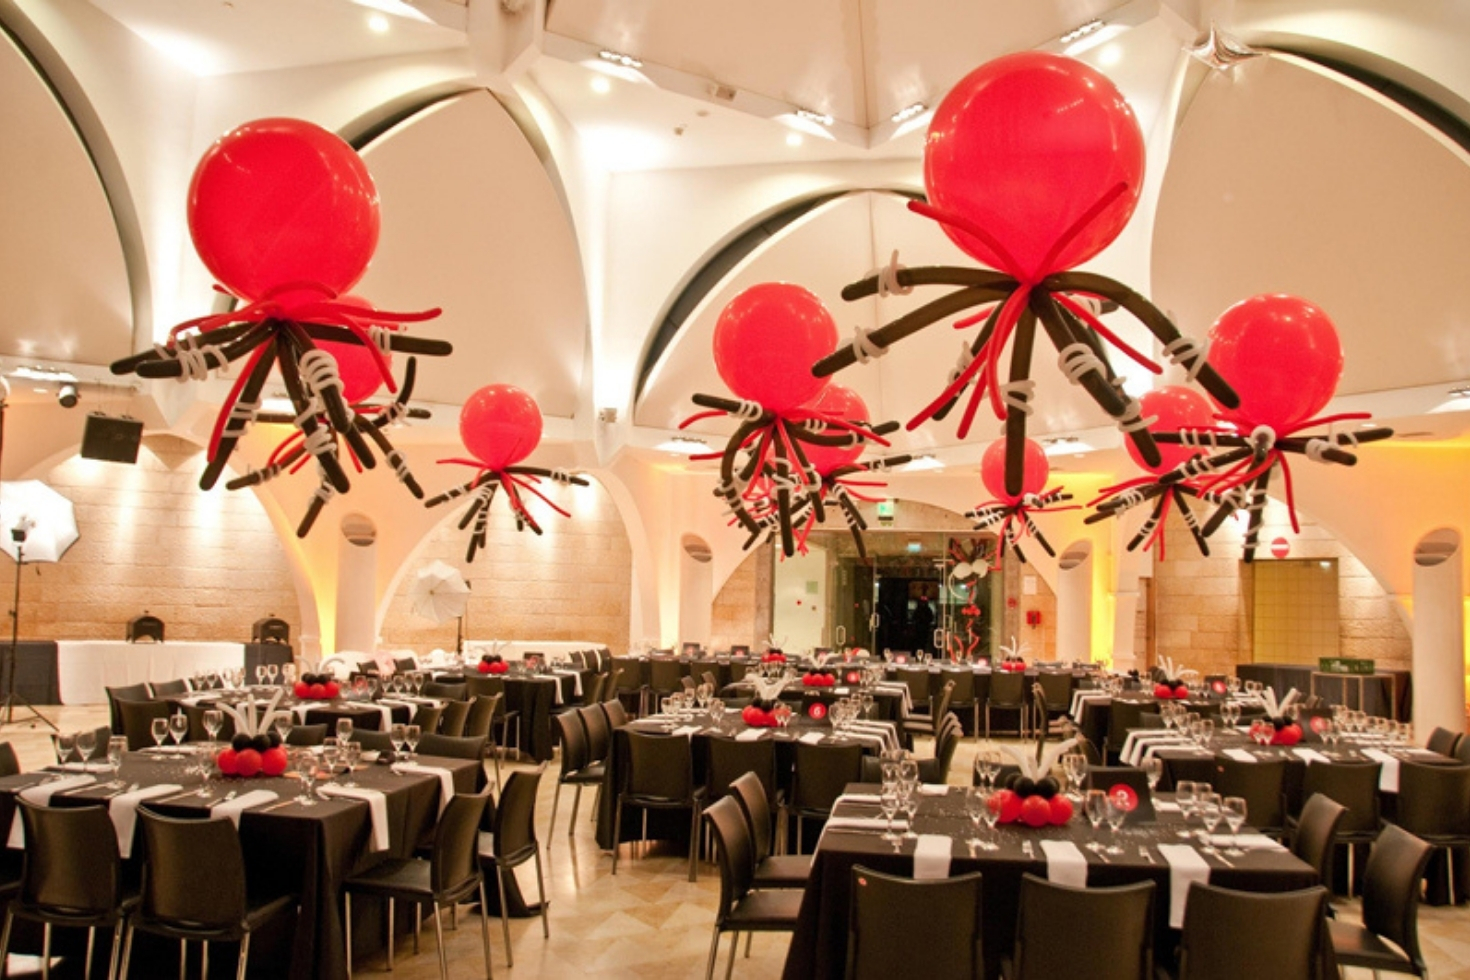 Multiple tables in a ballroom with large balloon centerpieces